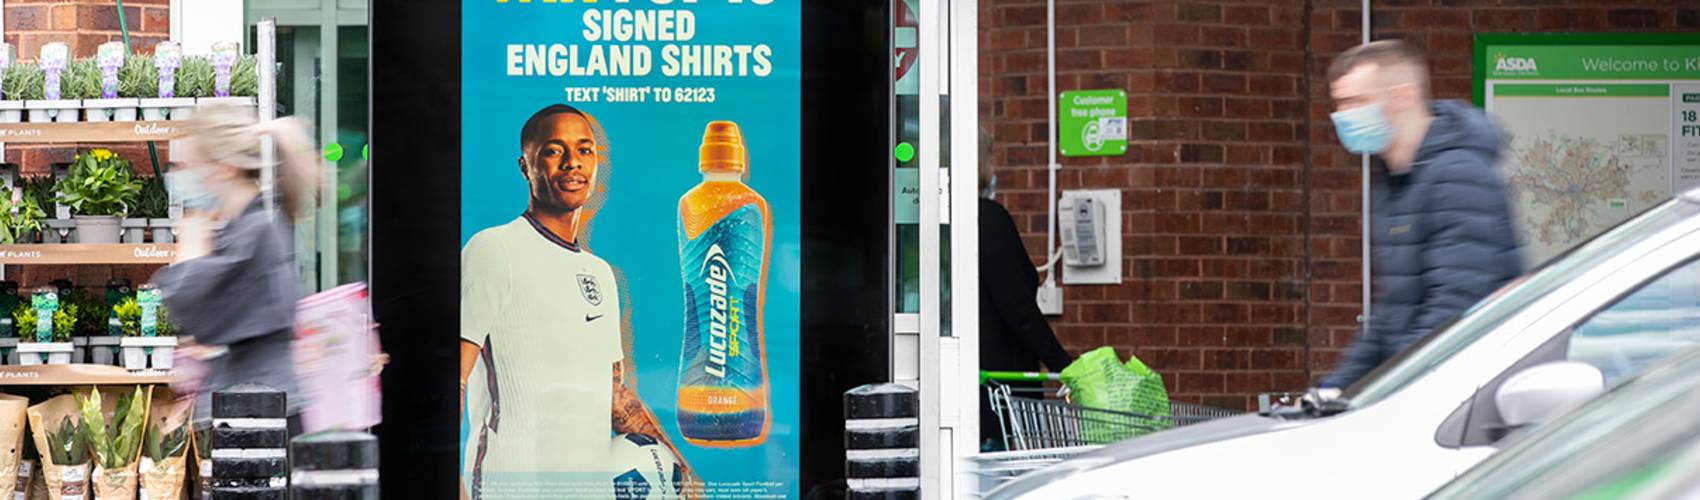 Lucozade ad outside an Asda supermarket supporting the euros football tournament with a competition to win a signed England shirt